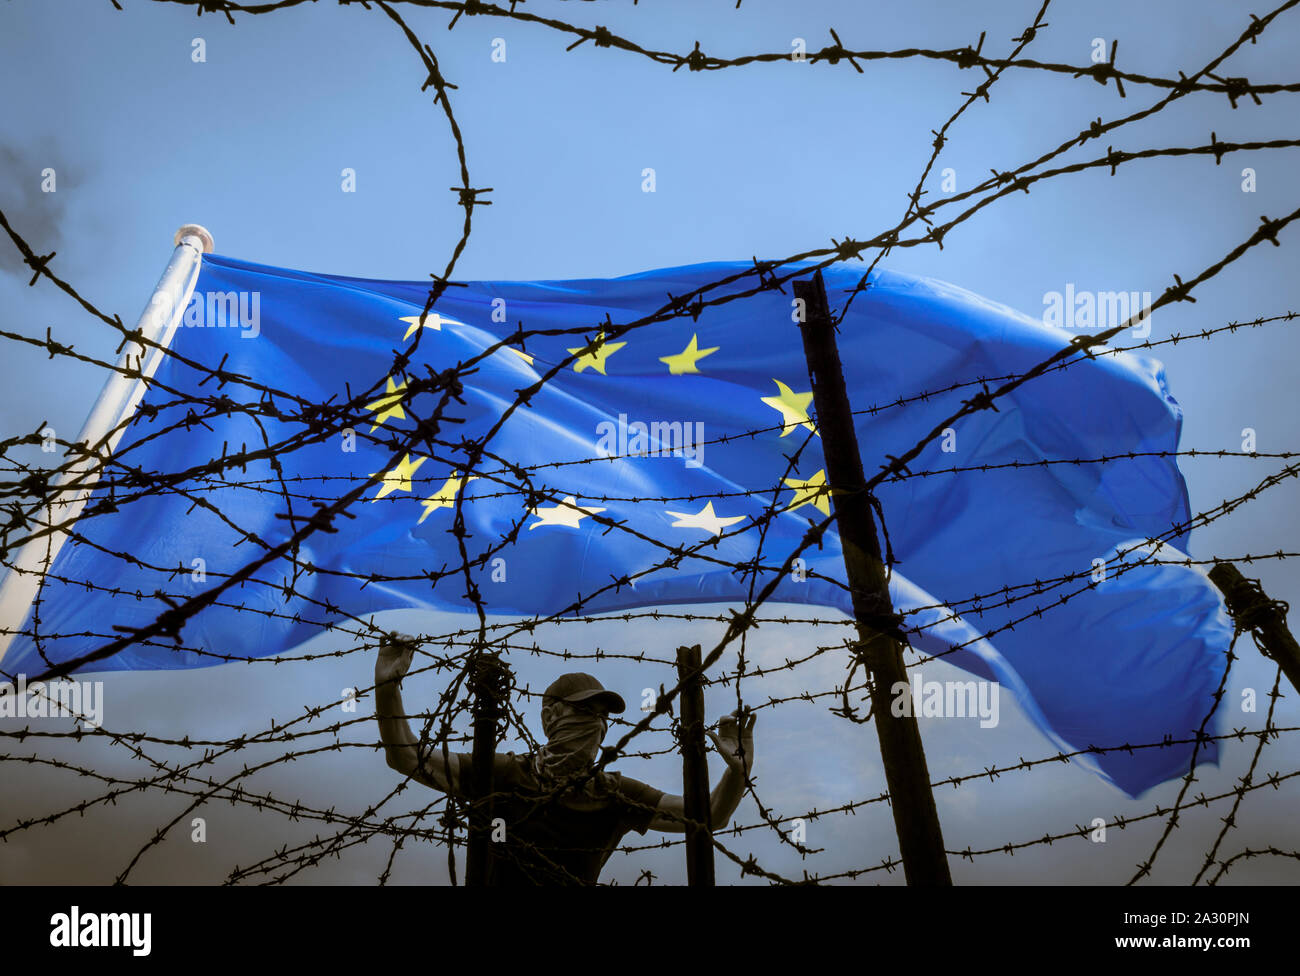 Brexit, immigration, asylum seekers... concept image. Man looking through barbed wire fence under EU flag. Stock Photo